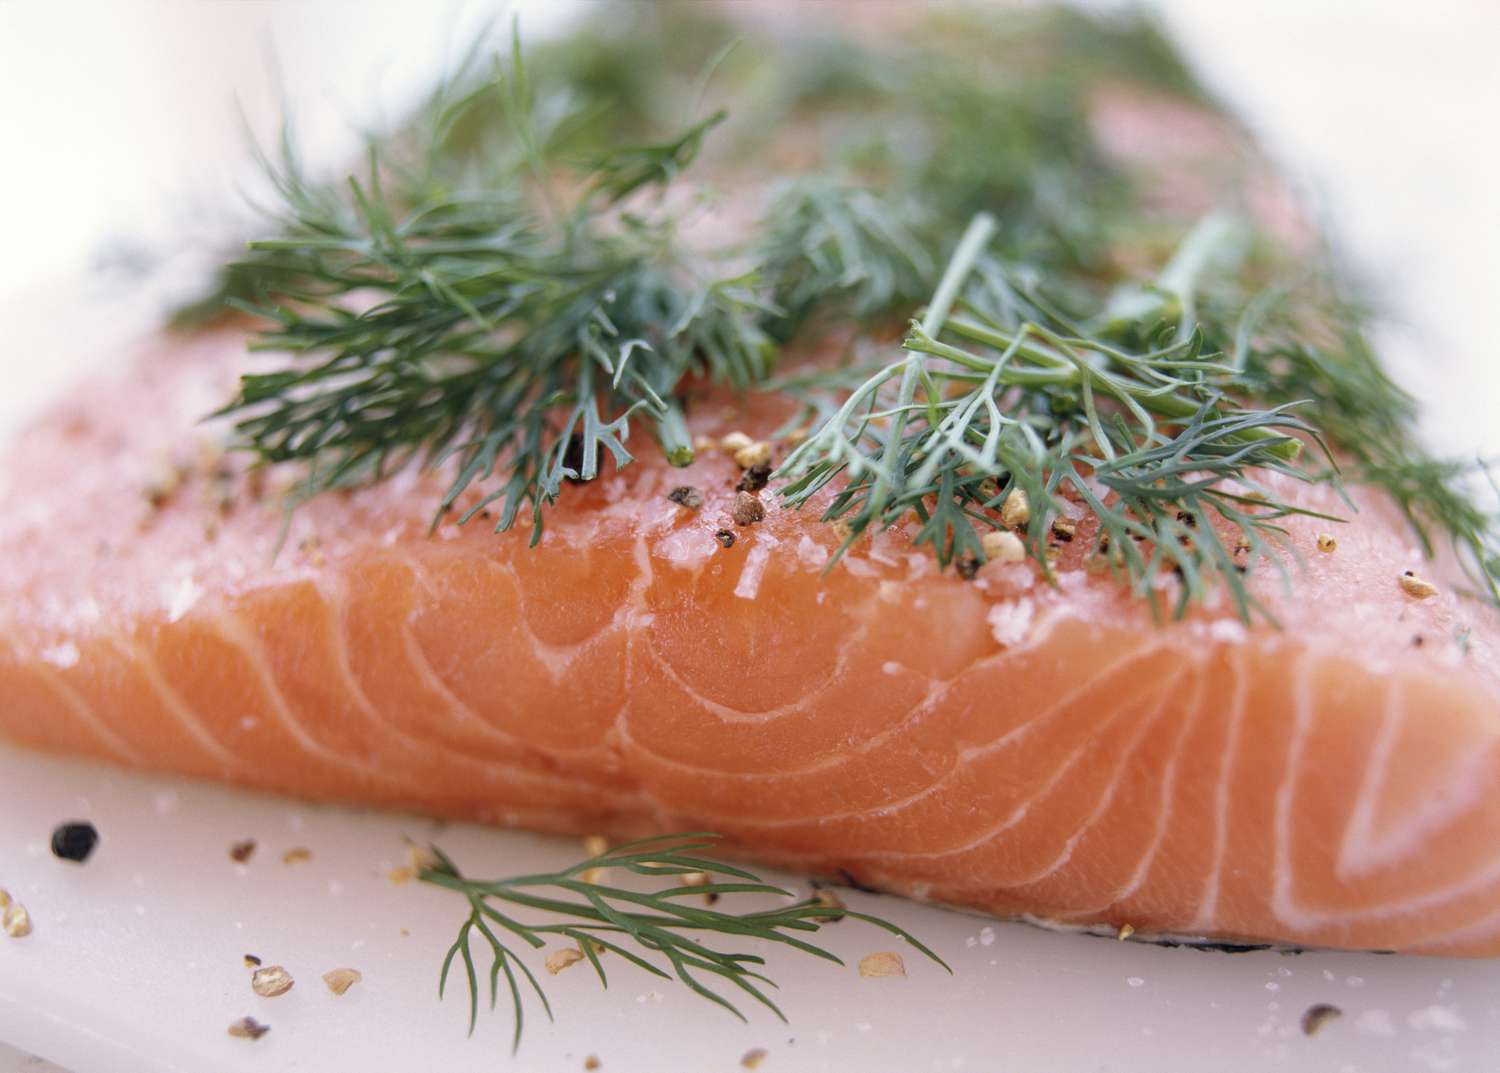 What Herbs Go Well With Fish